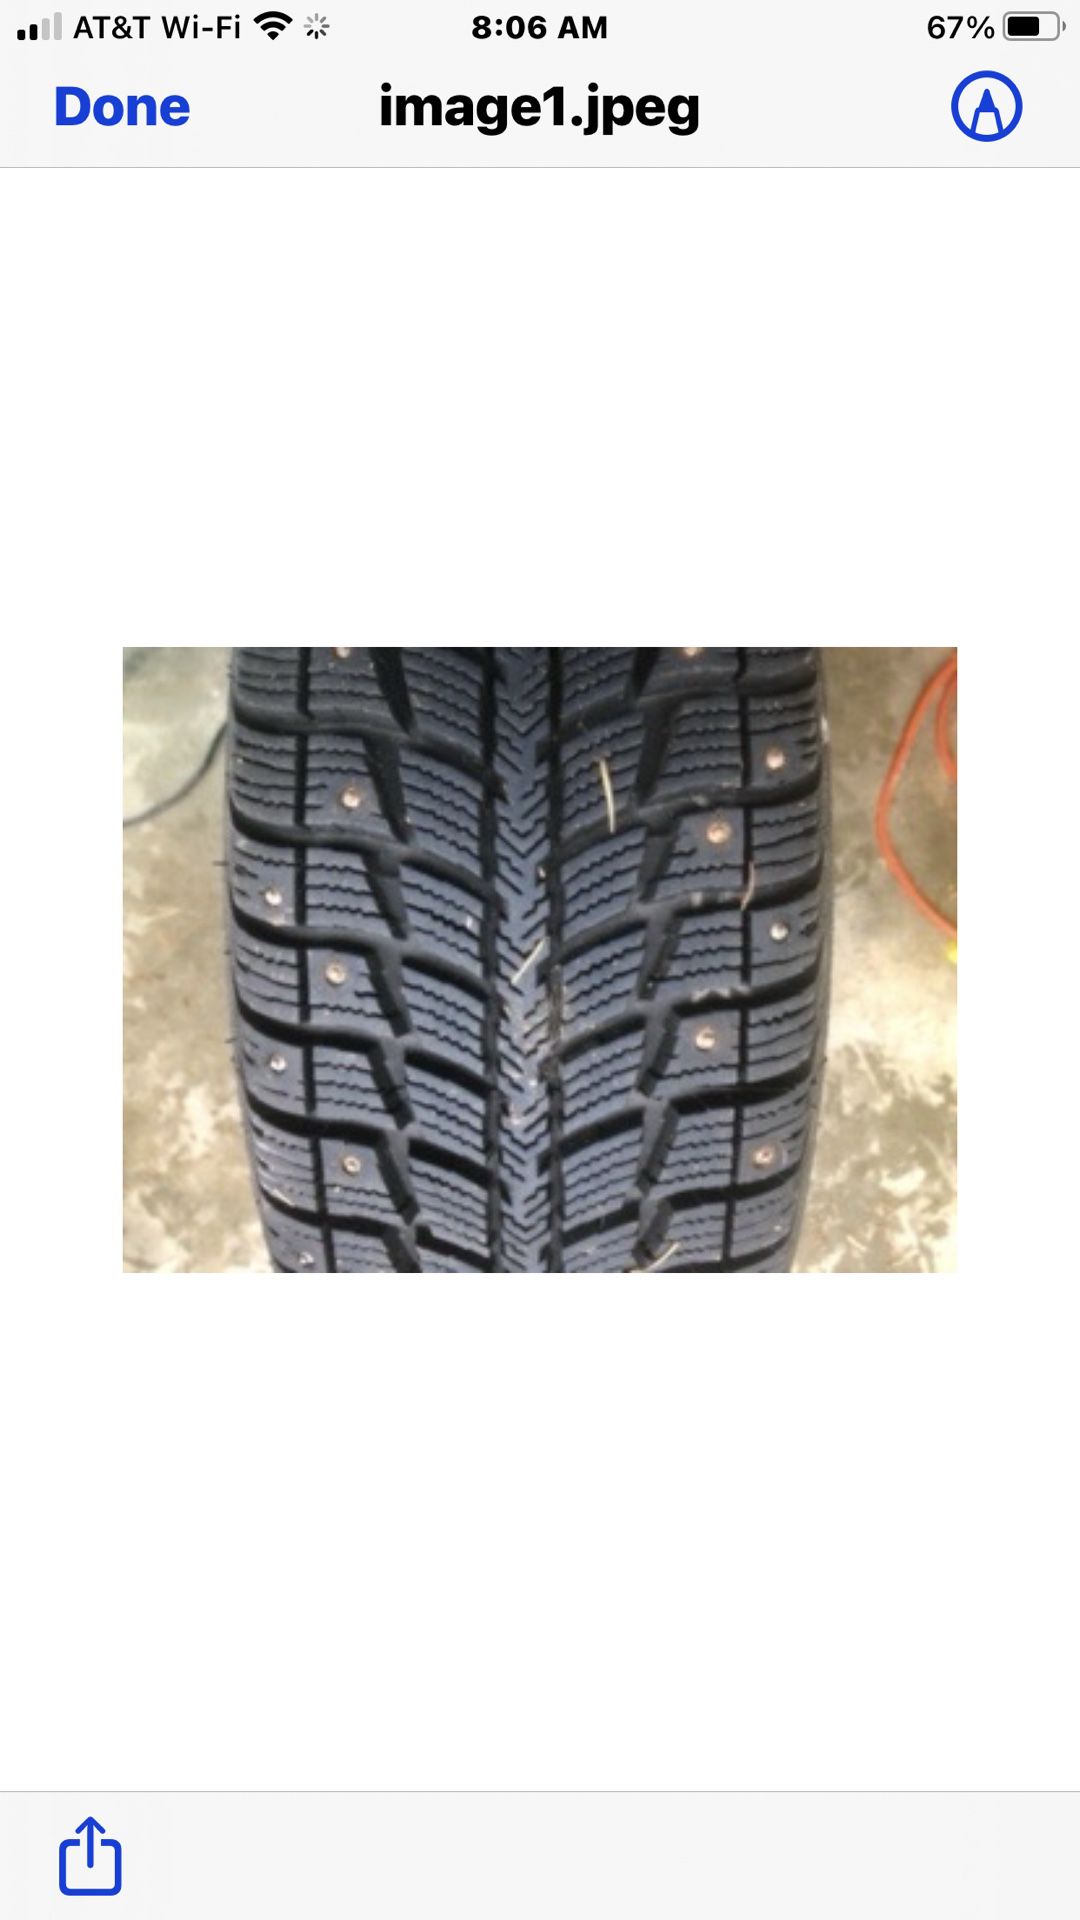 Witer Is Coming!!!!!Winter tires, studded. Set of 4 Federal Himalaya WS2 195/65R15 studded winter tires on rims. Used one season. $75 each/$300 set.